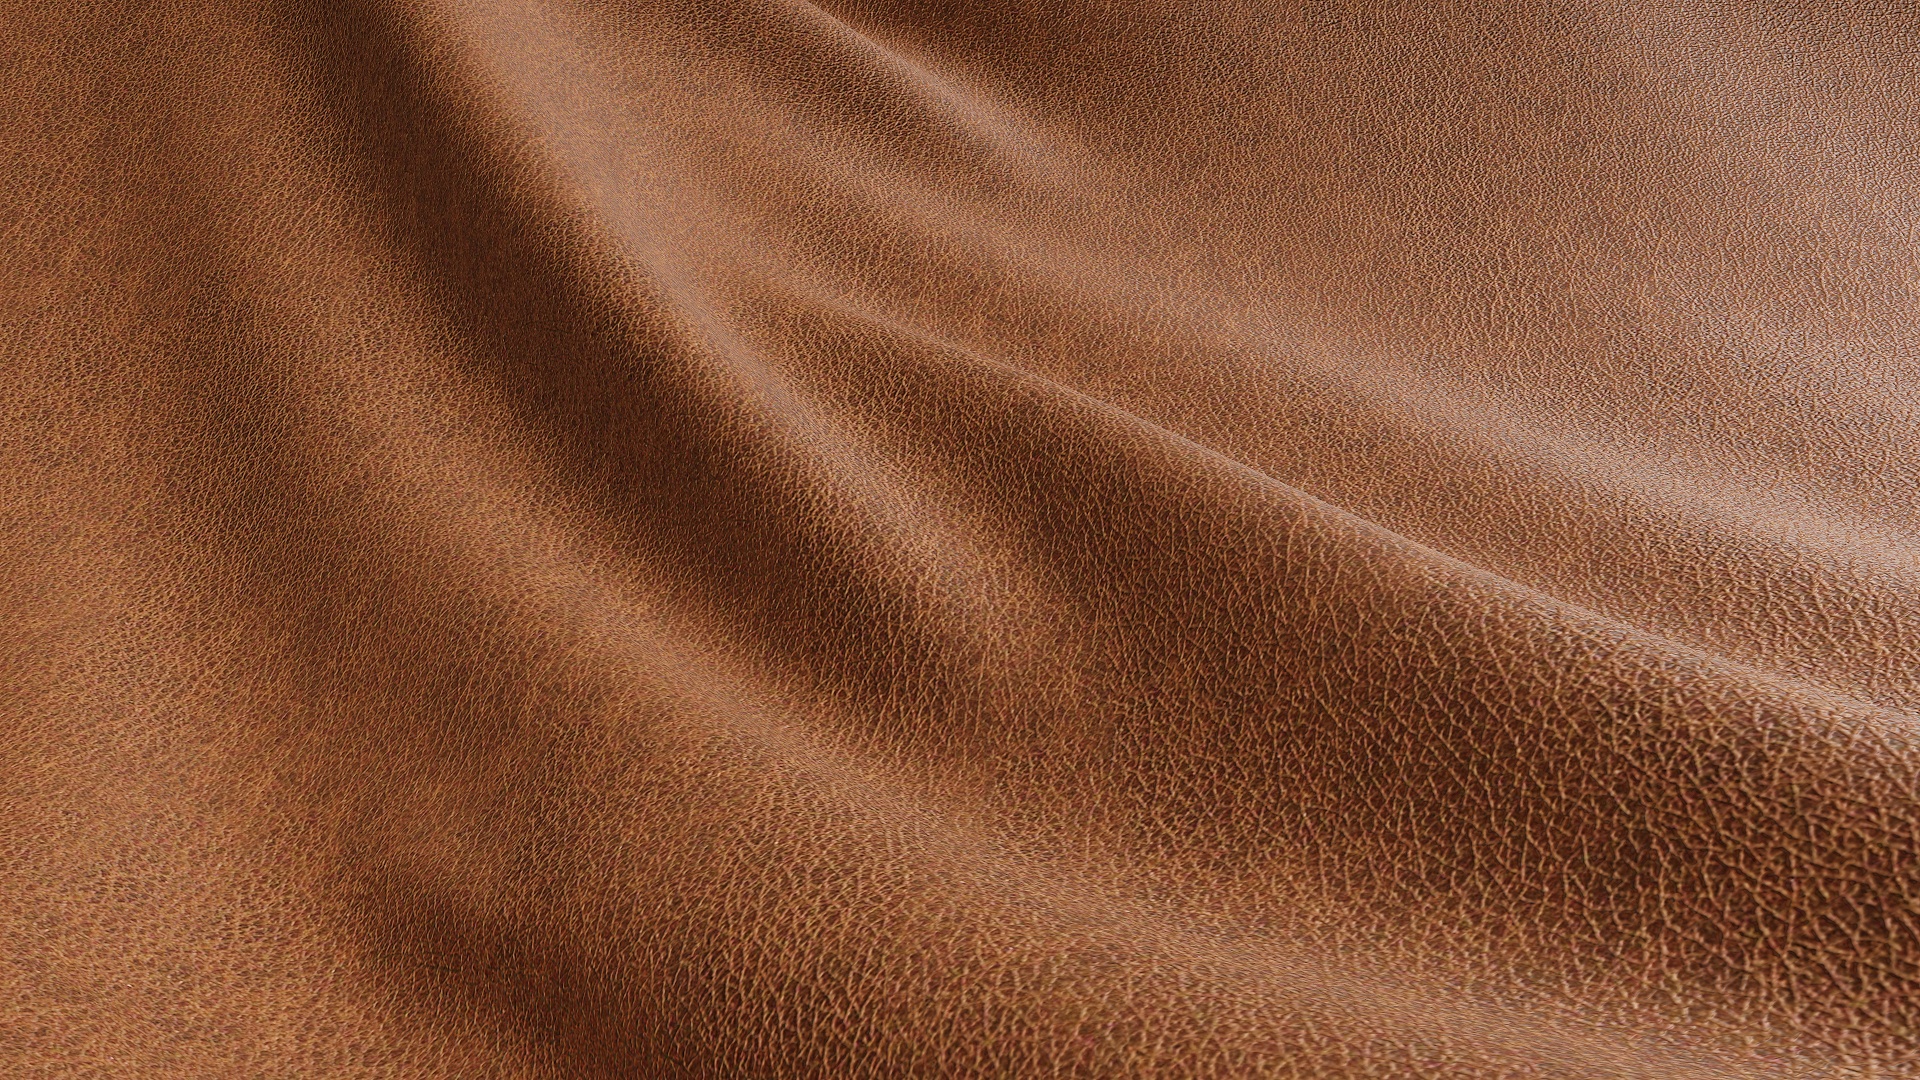 Dirty Padded Leather PBR Material - Free PBR Materials